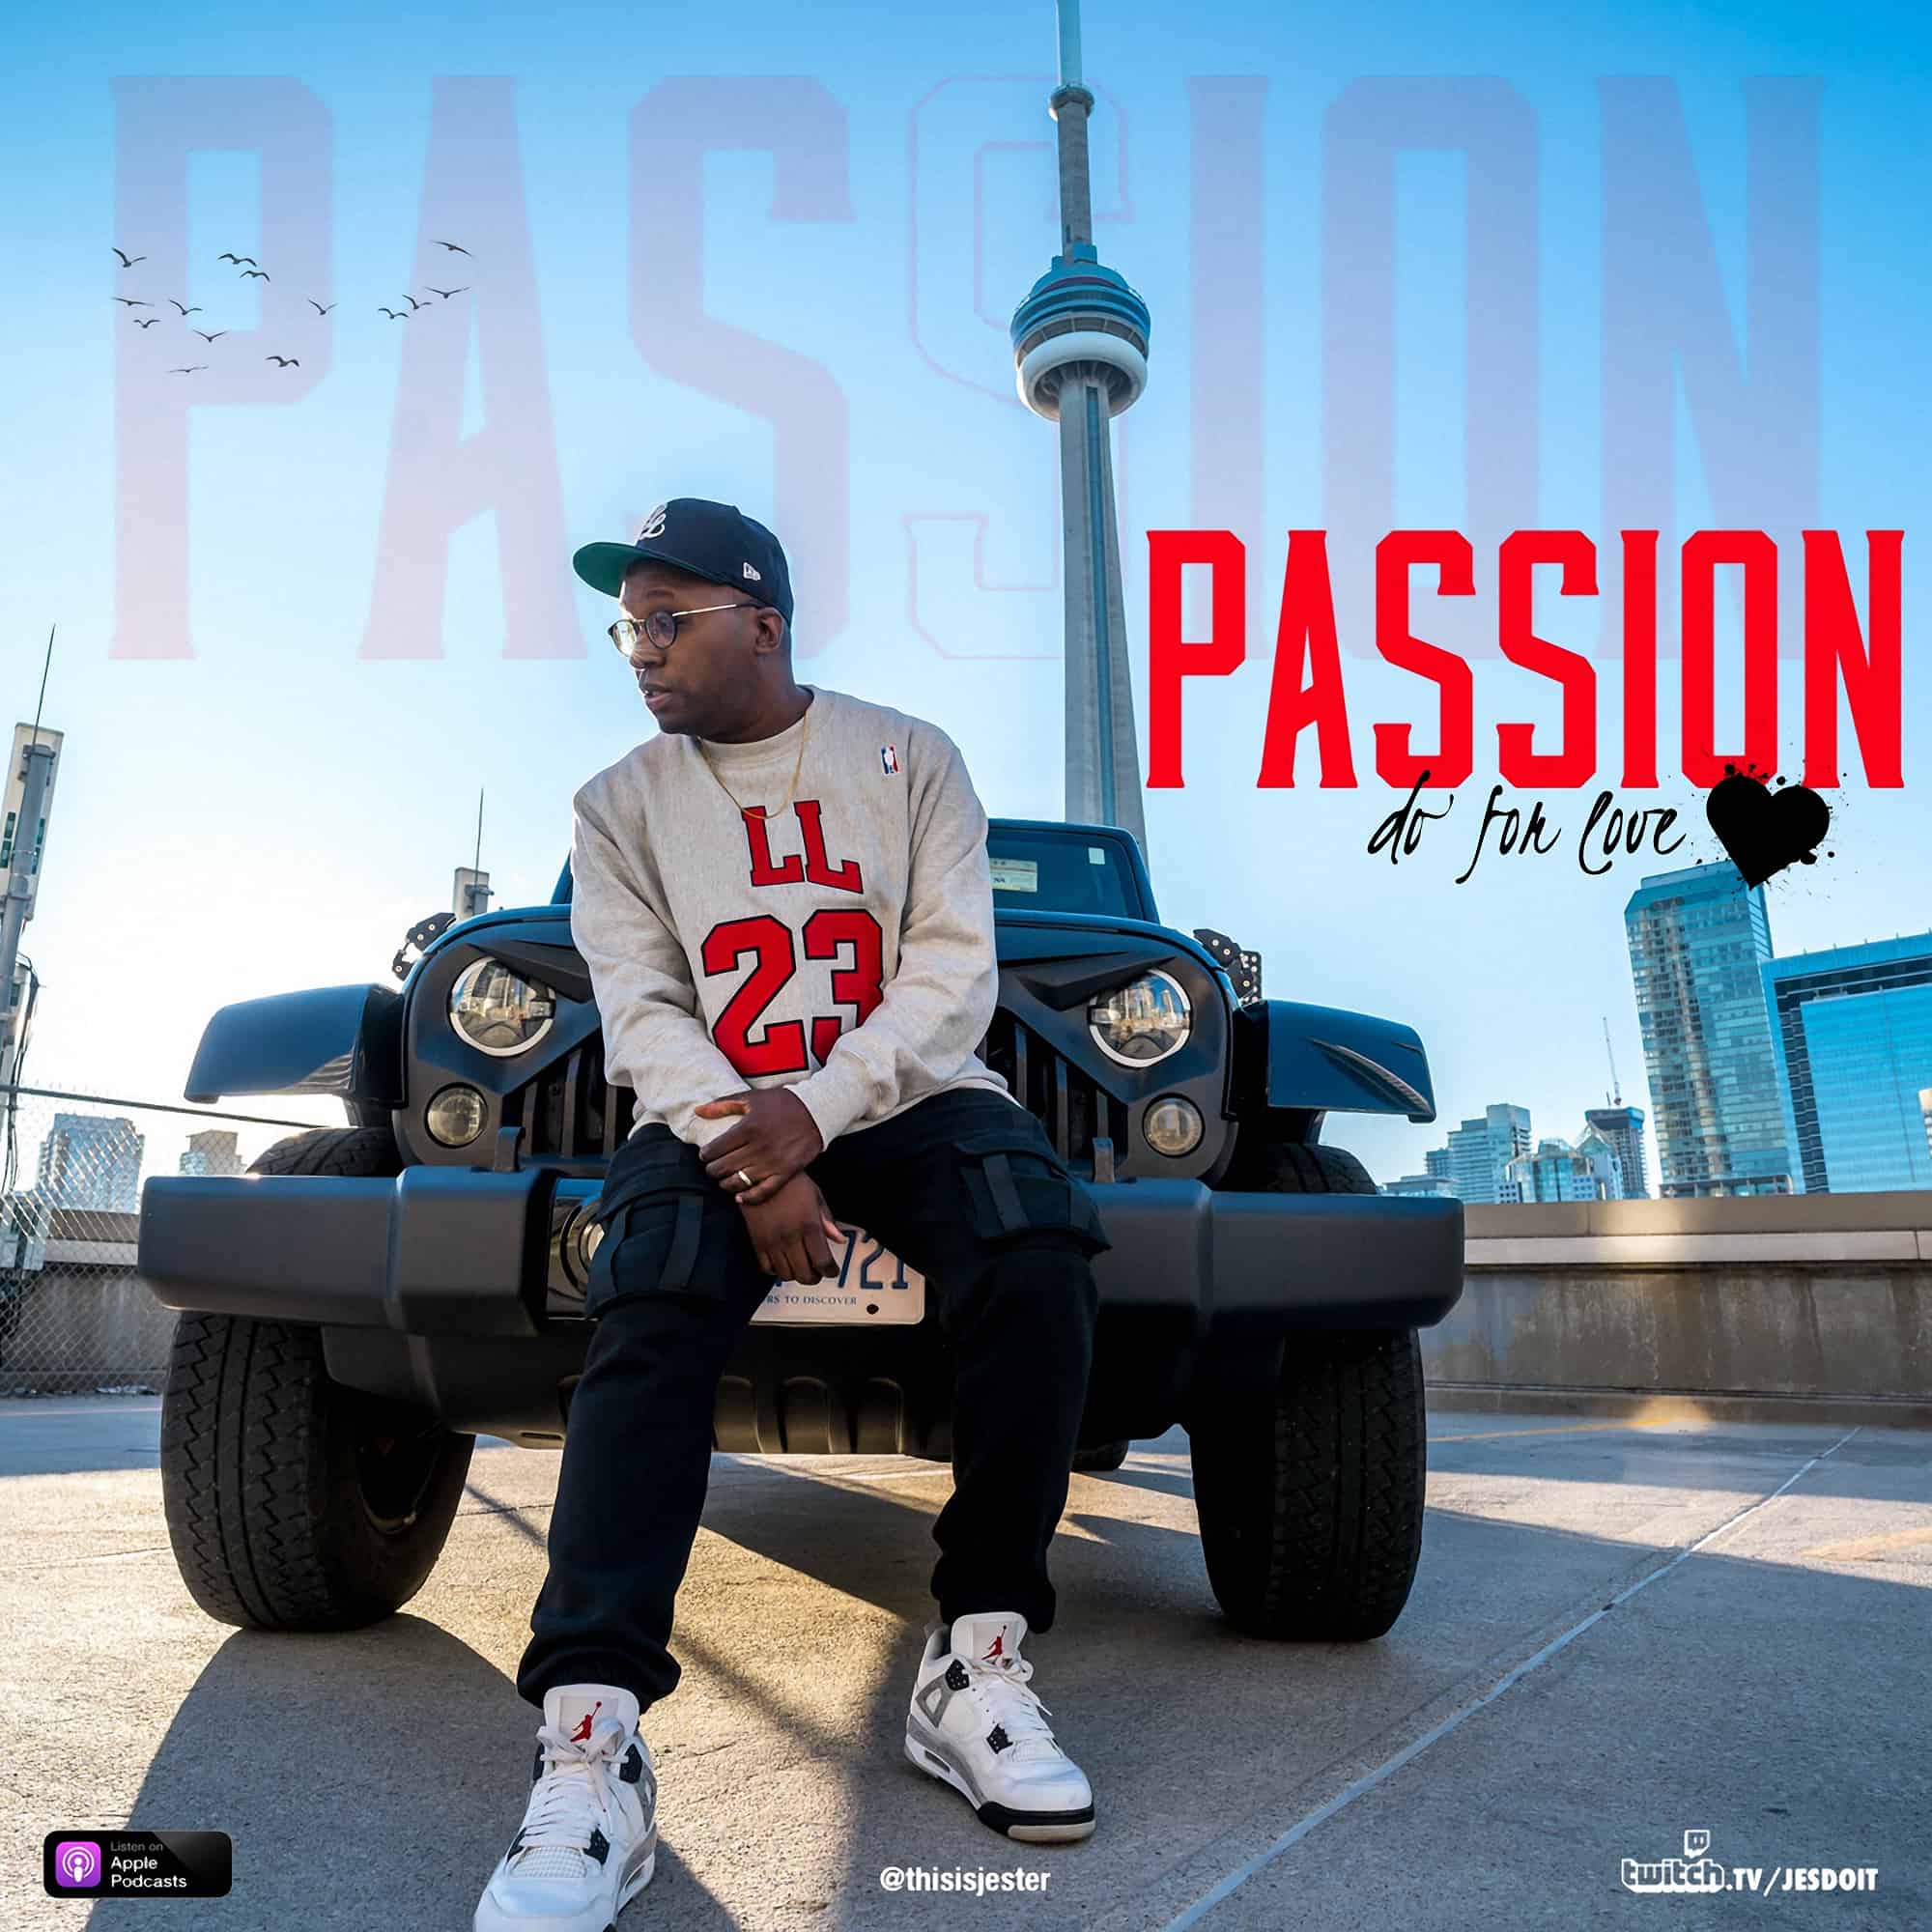 Jester - PASSION (Do For Love)